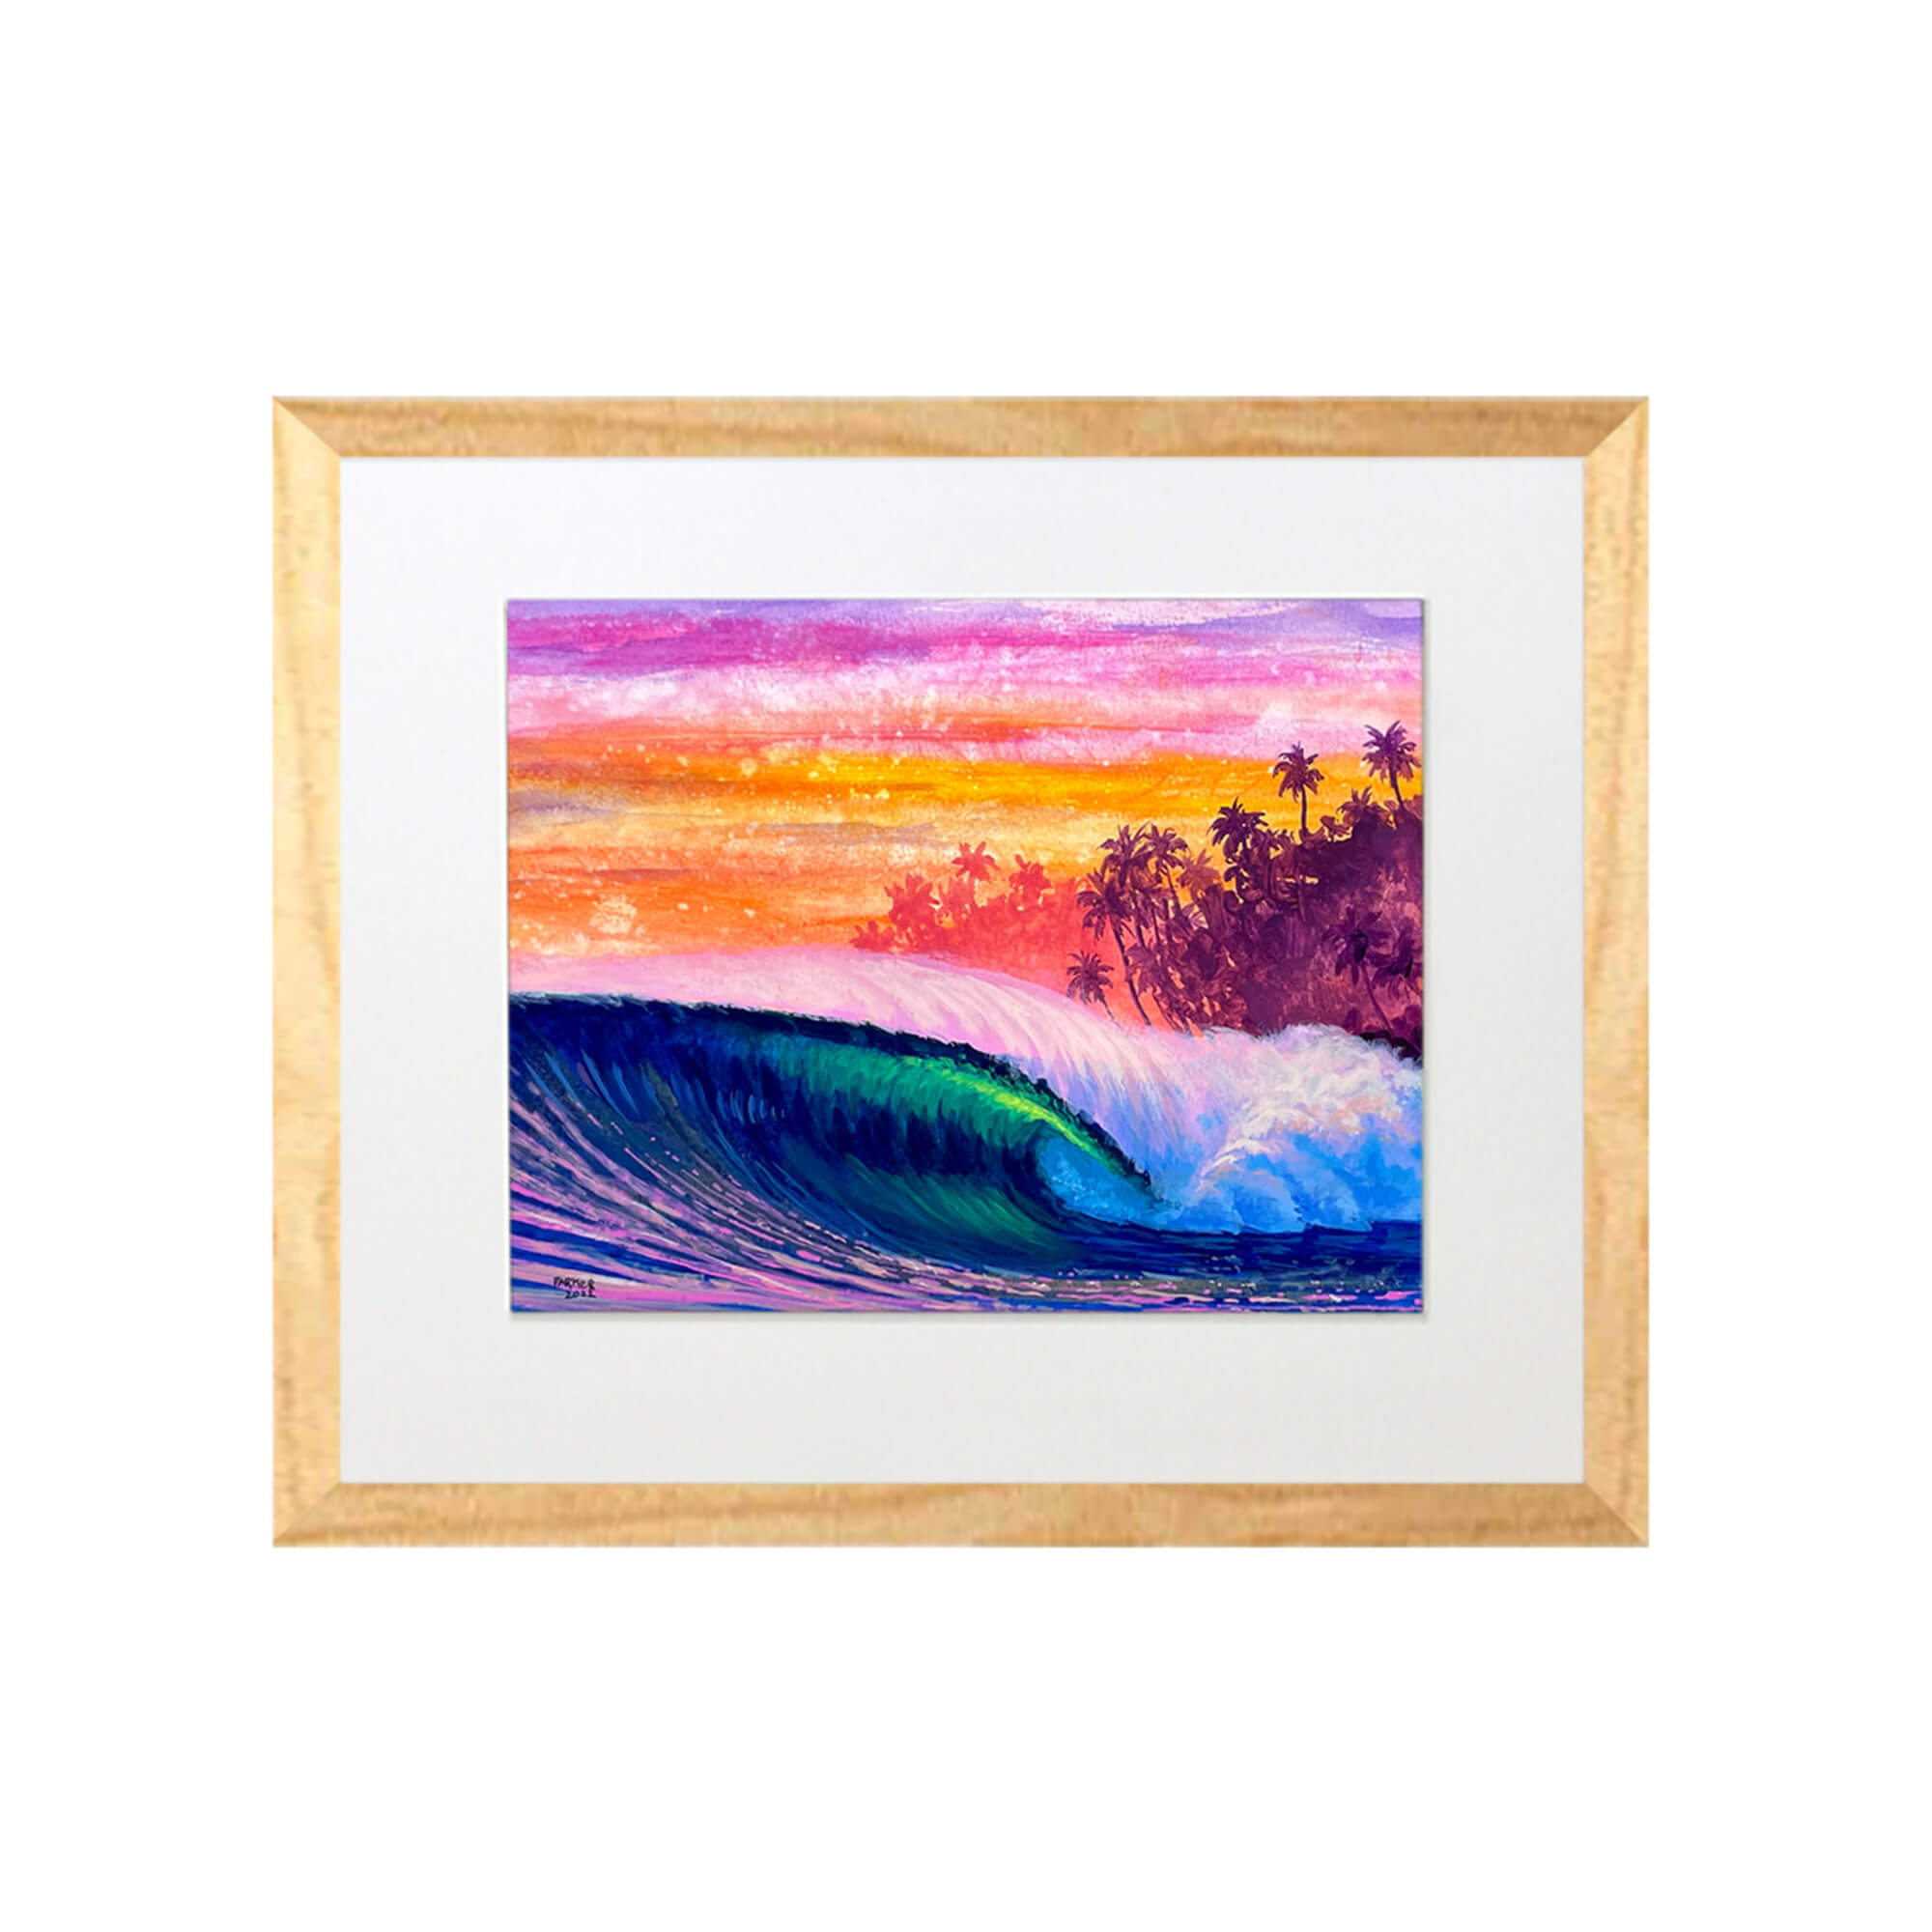 Colorful crashing wave and beautiful sunset by wave artist Patrick Parker